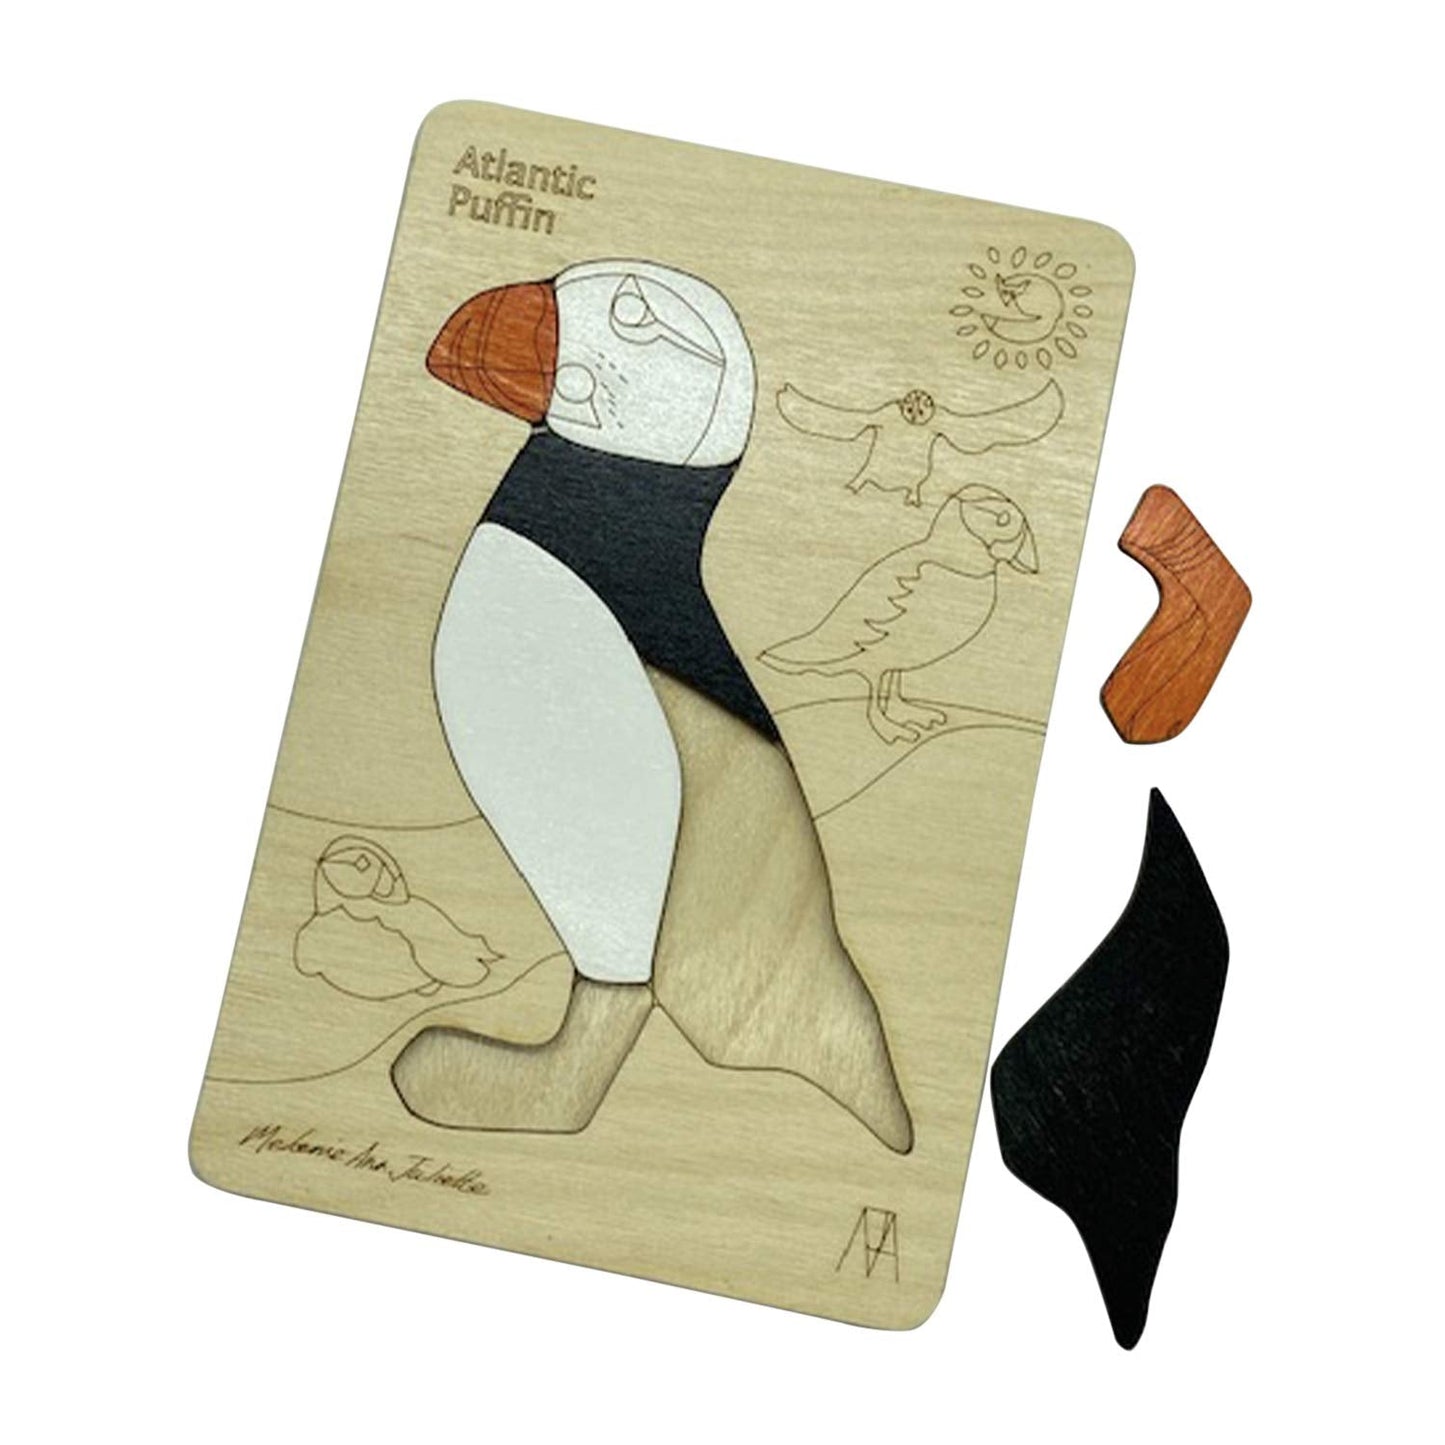 Buy Wooden Atlantic Puffin Puzzle Board - SkilloToys.com